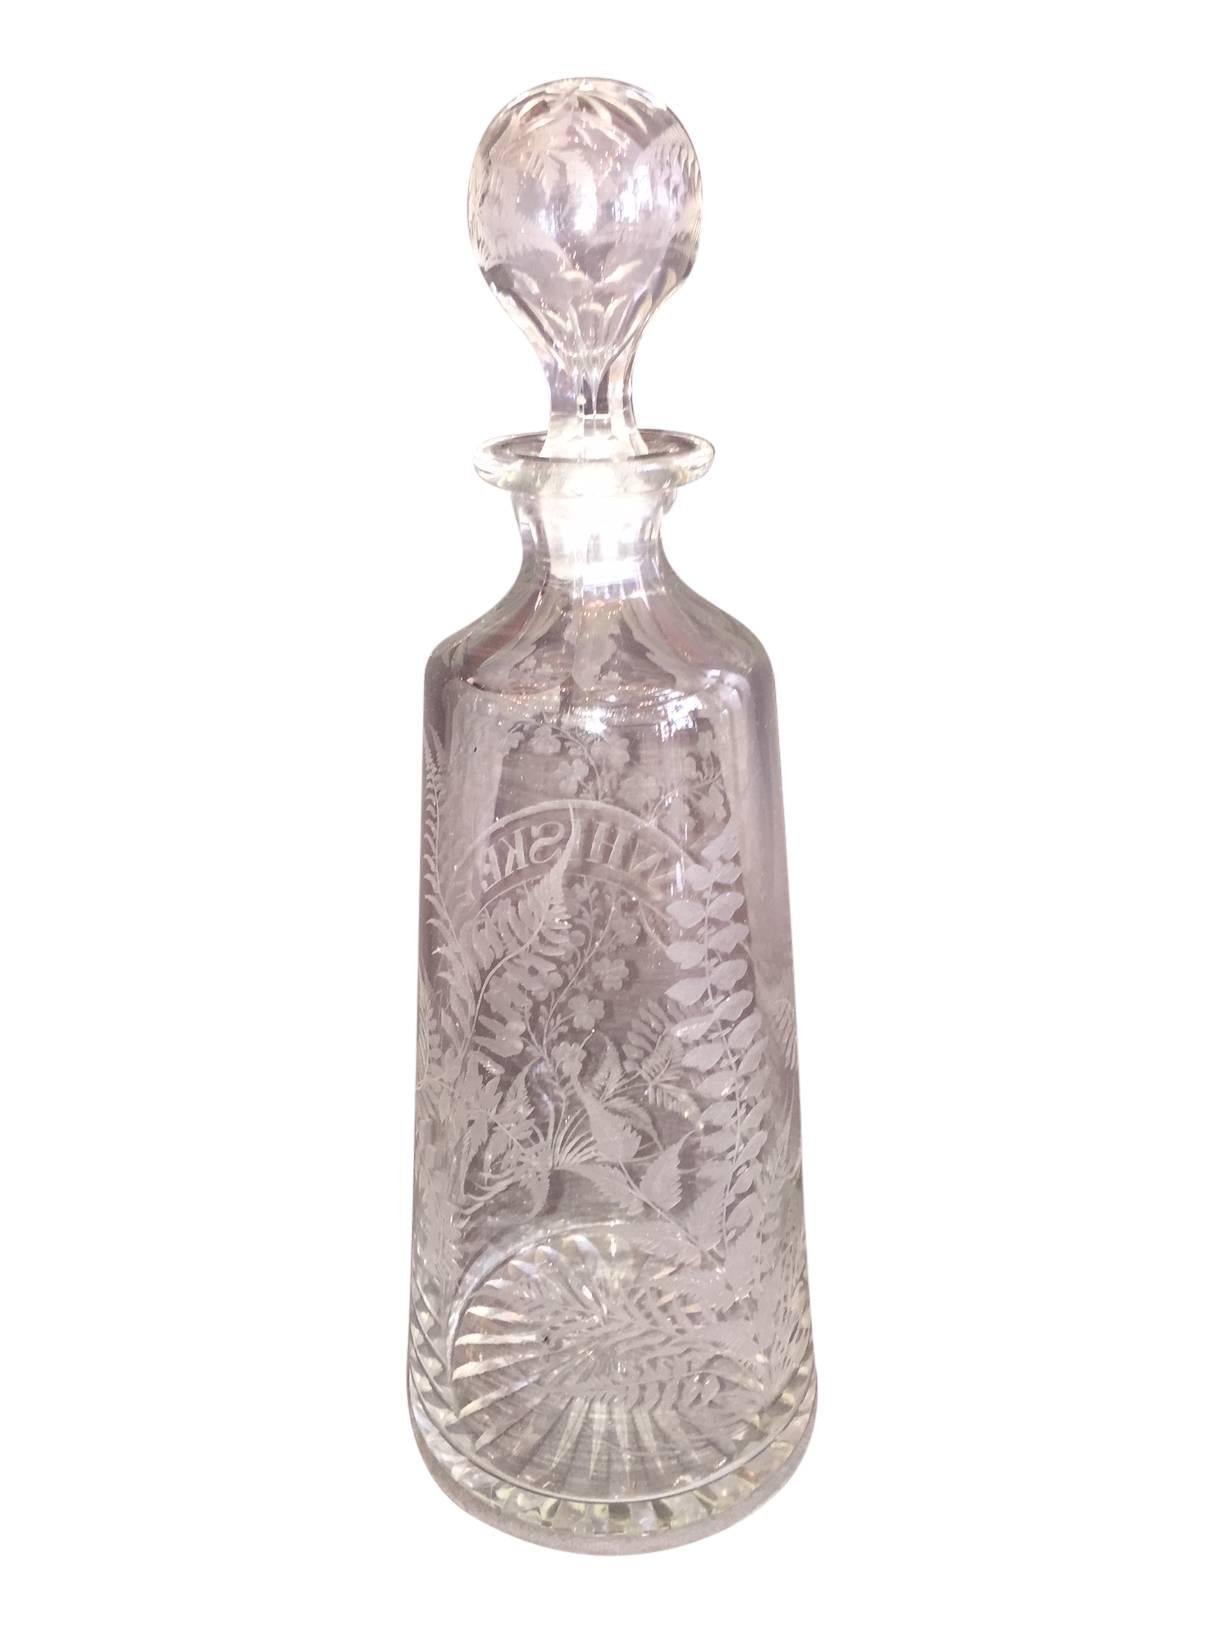 This is a beautiful late 19th century Scottish etched glass whiskey decanter. It features wonderful floral motifs.